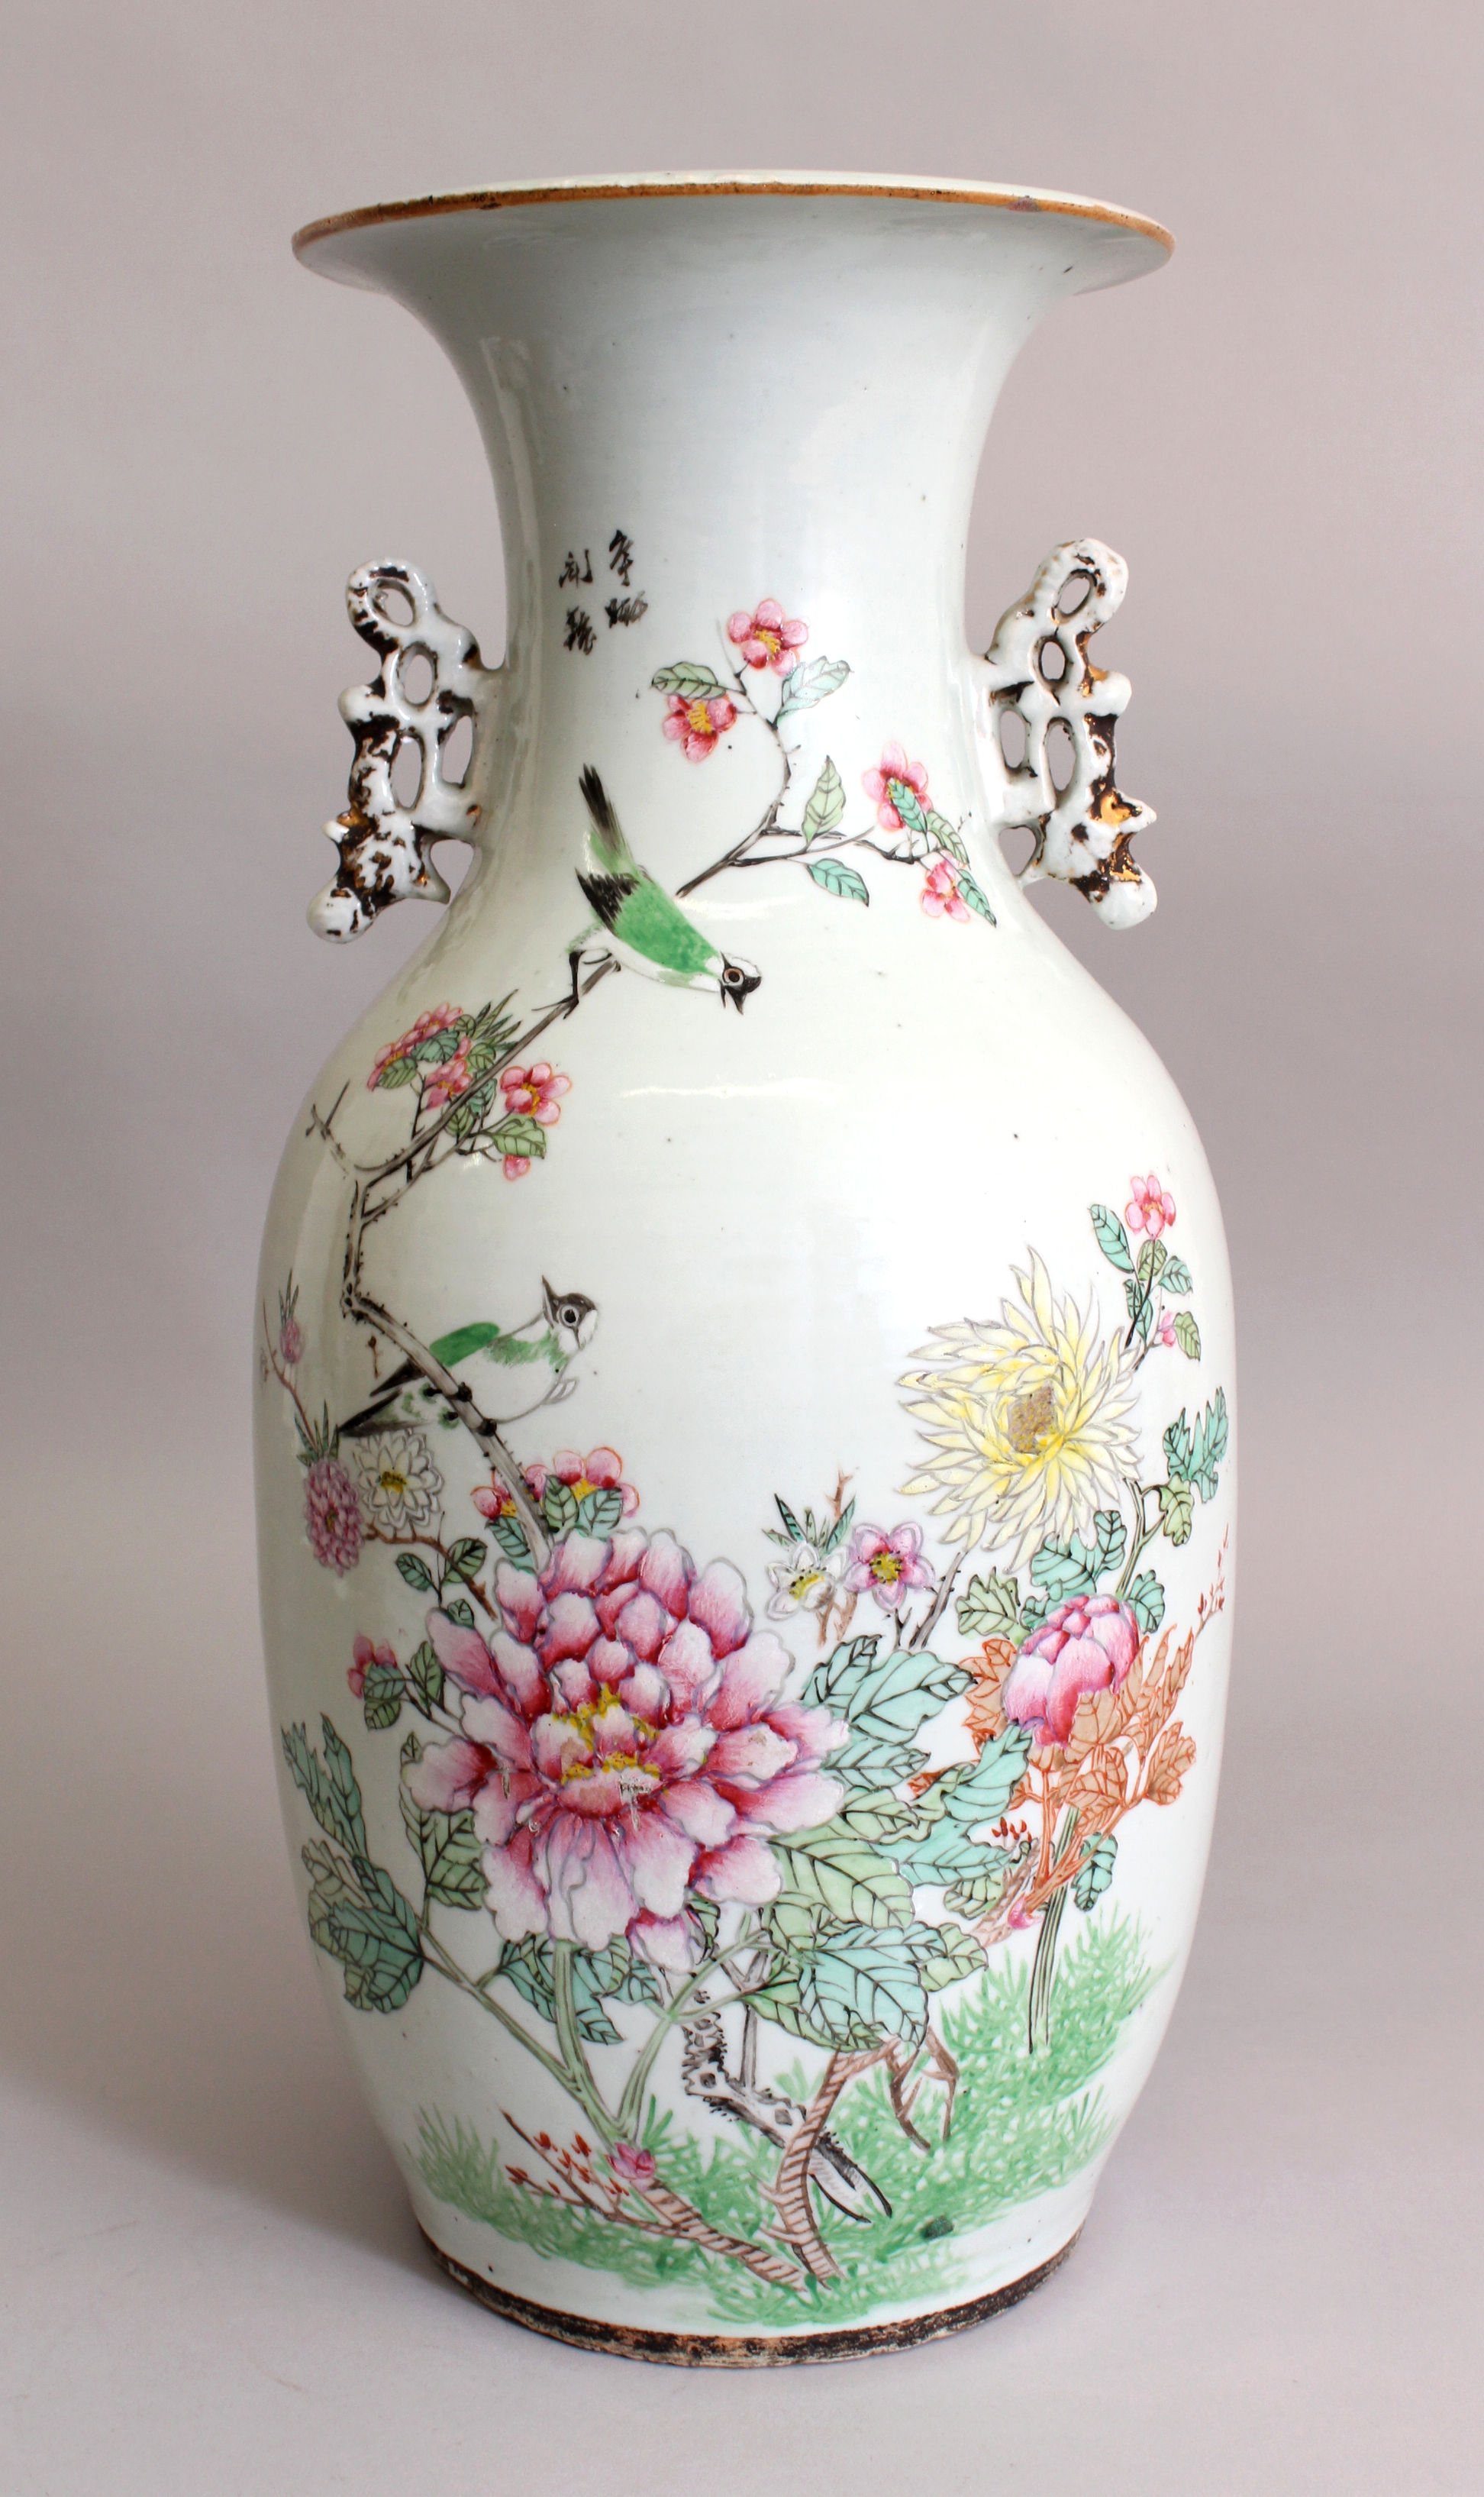 A LARGE CHINESE REPUBLIC PERIOD FAMILLE ROSE PORCELAIN VASE, painted with calligraphy and with a